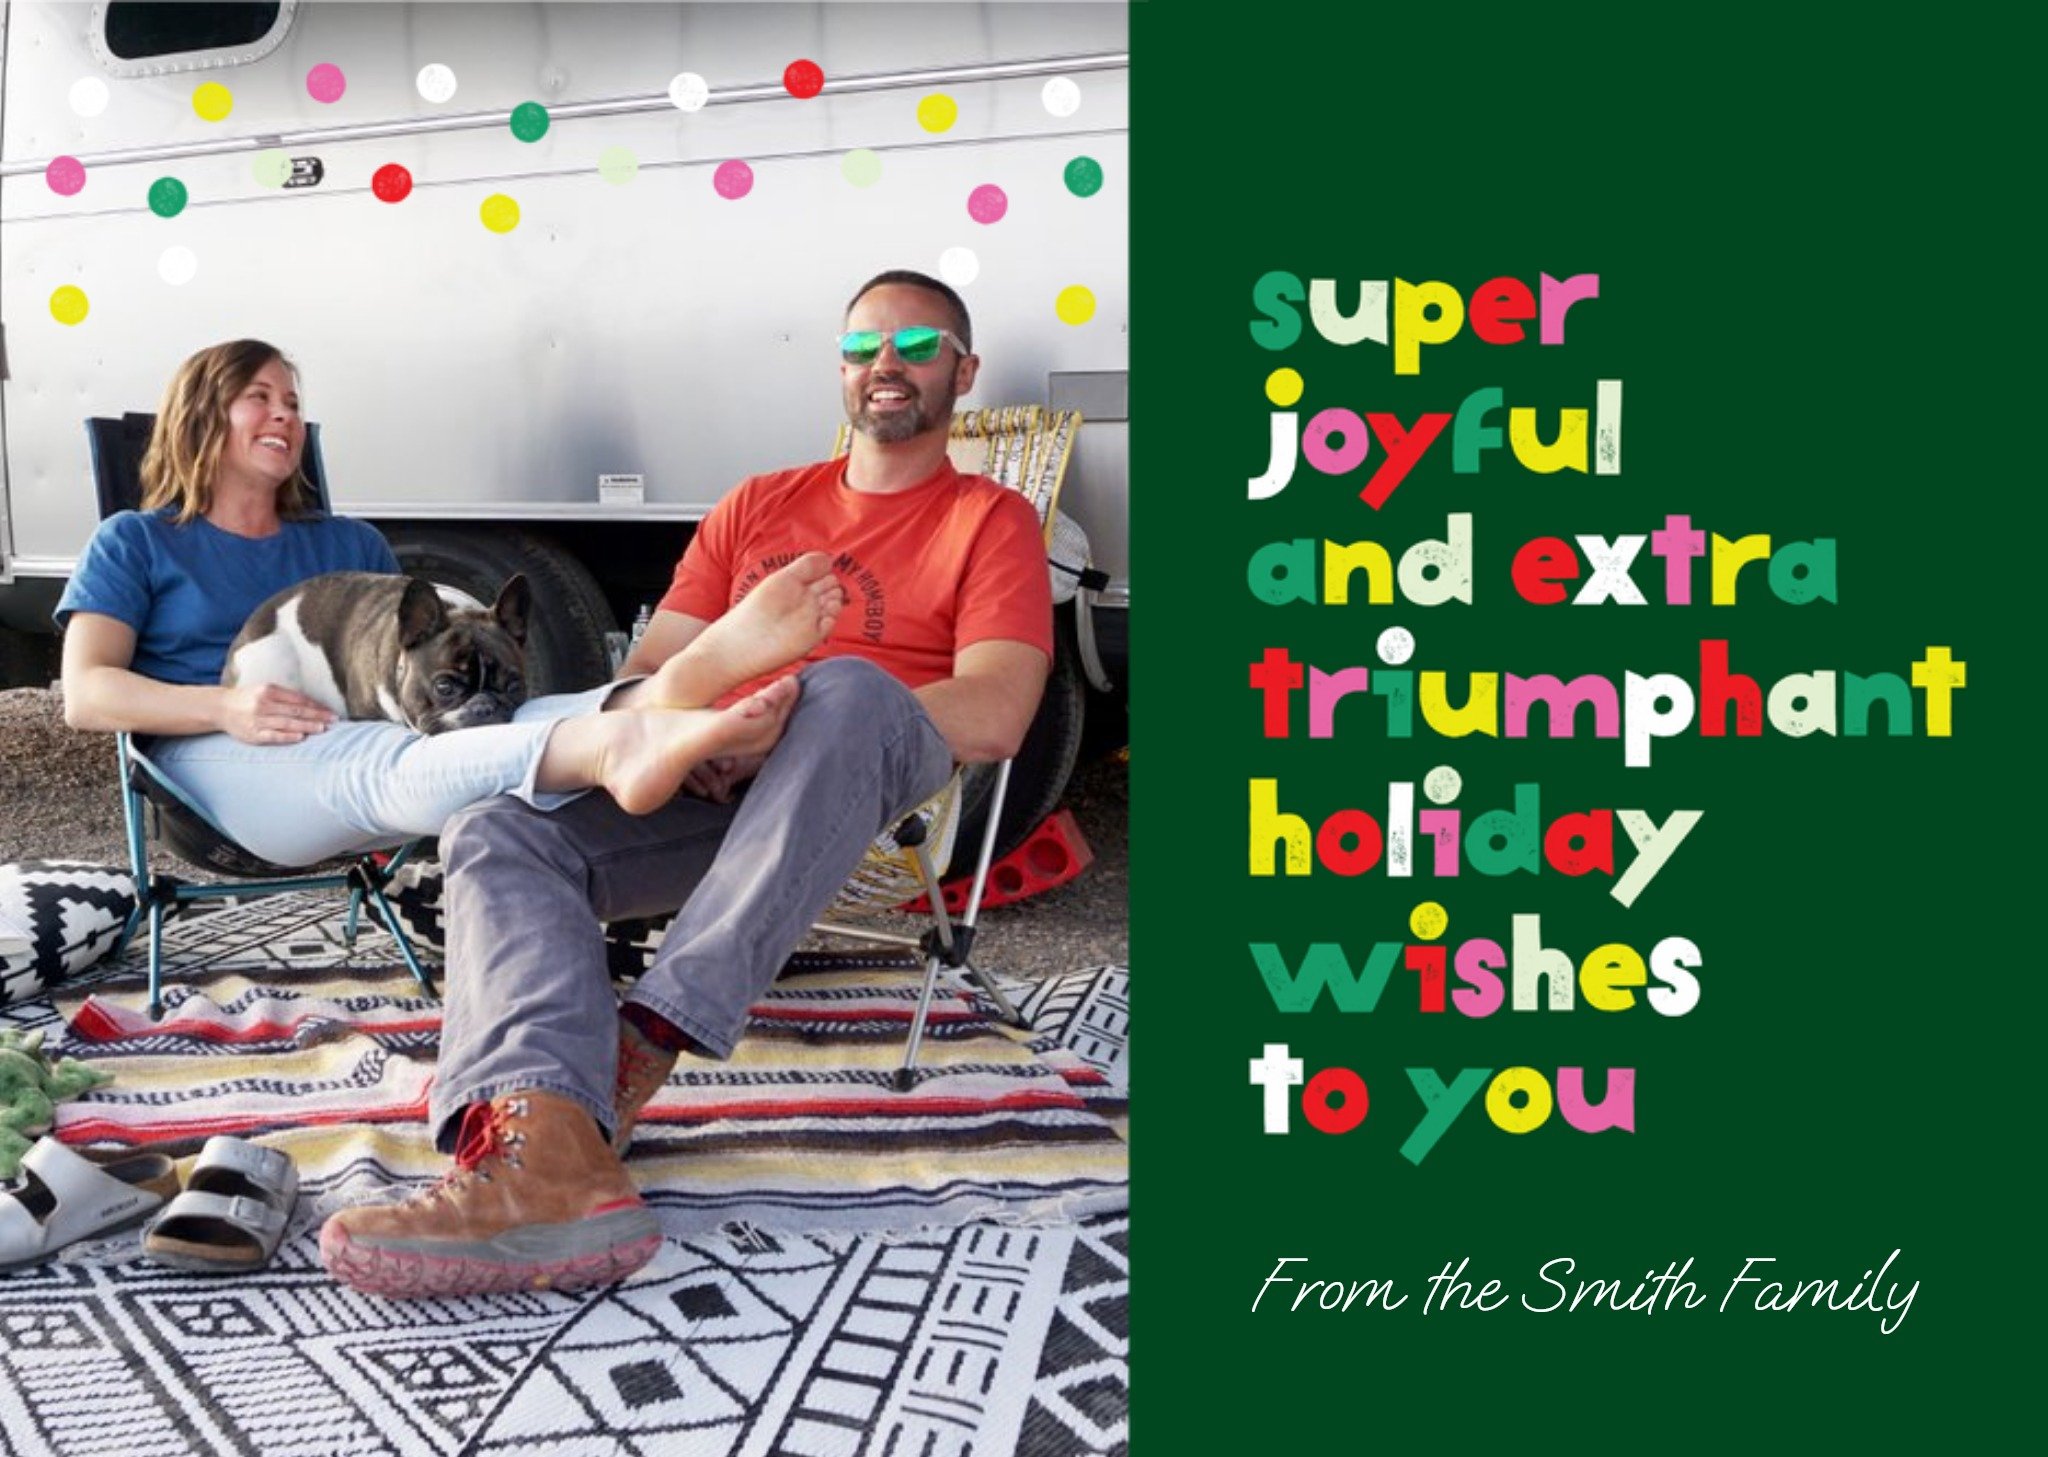 Moonpig Super Joyful Holiday Wishes To Your Christmss Photo Upload Card Ecard